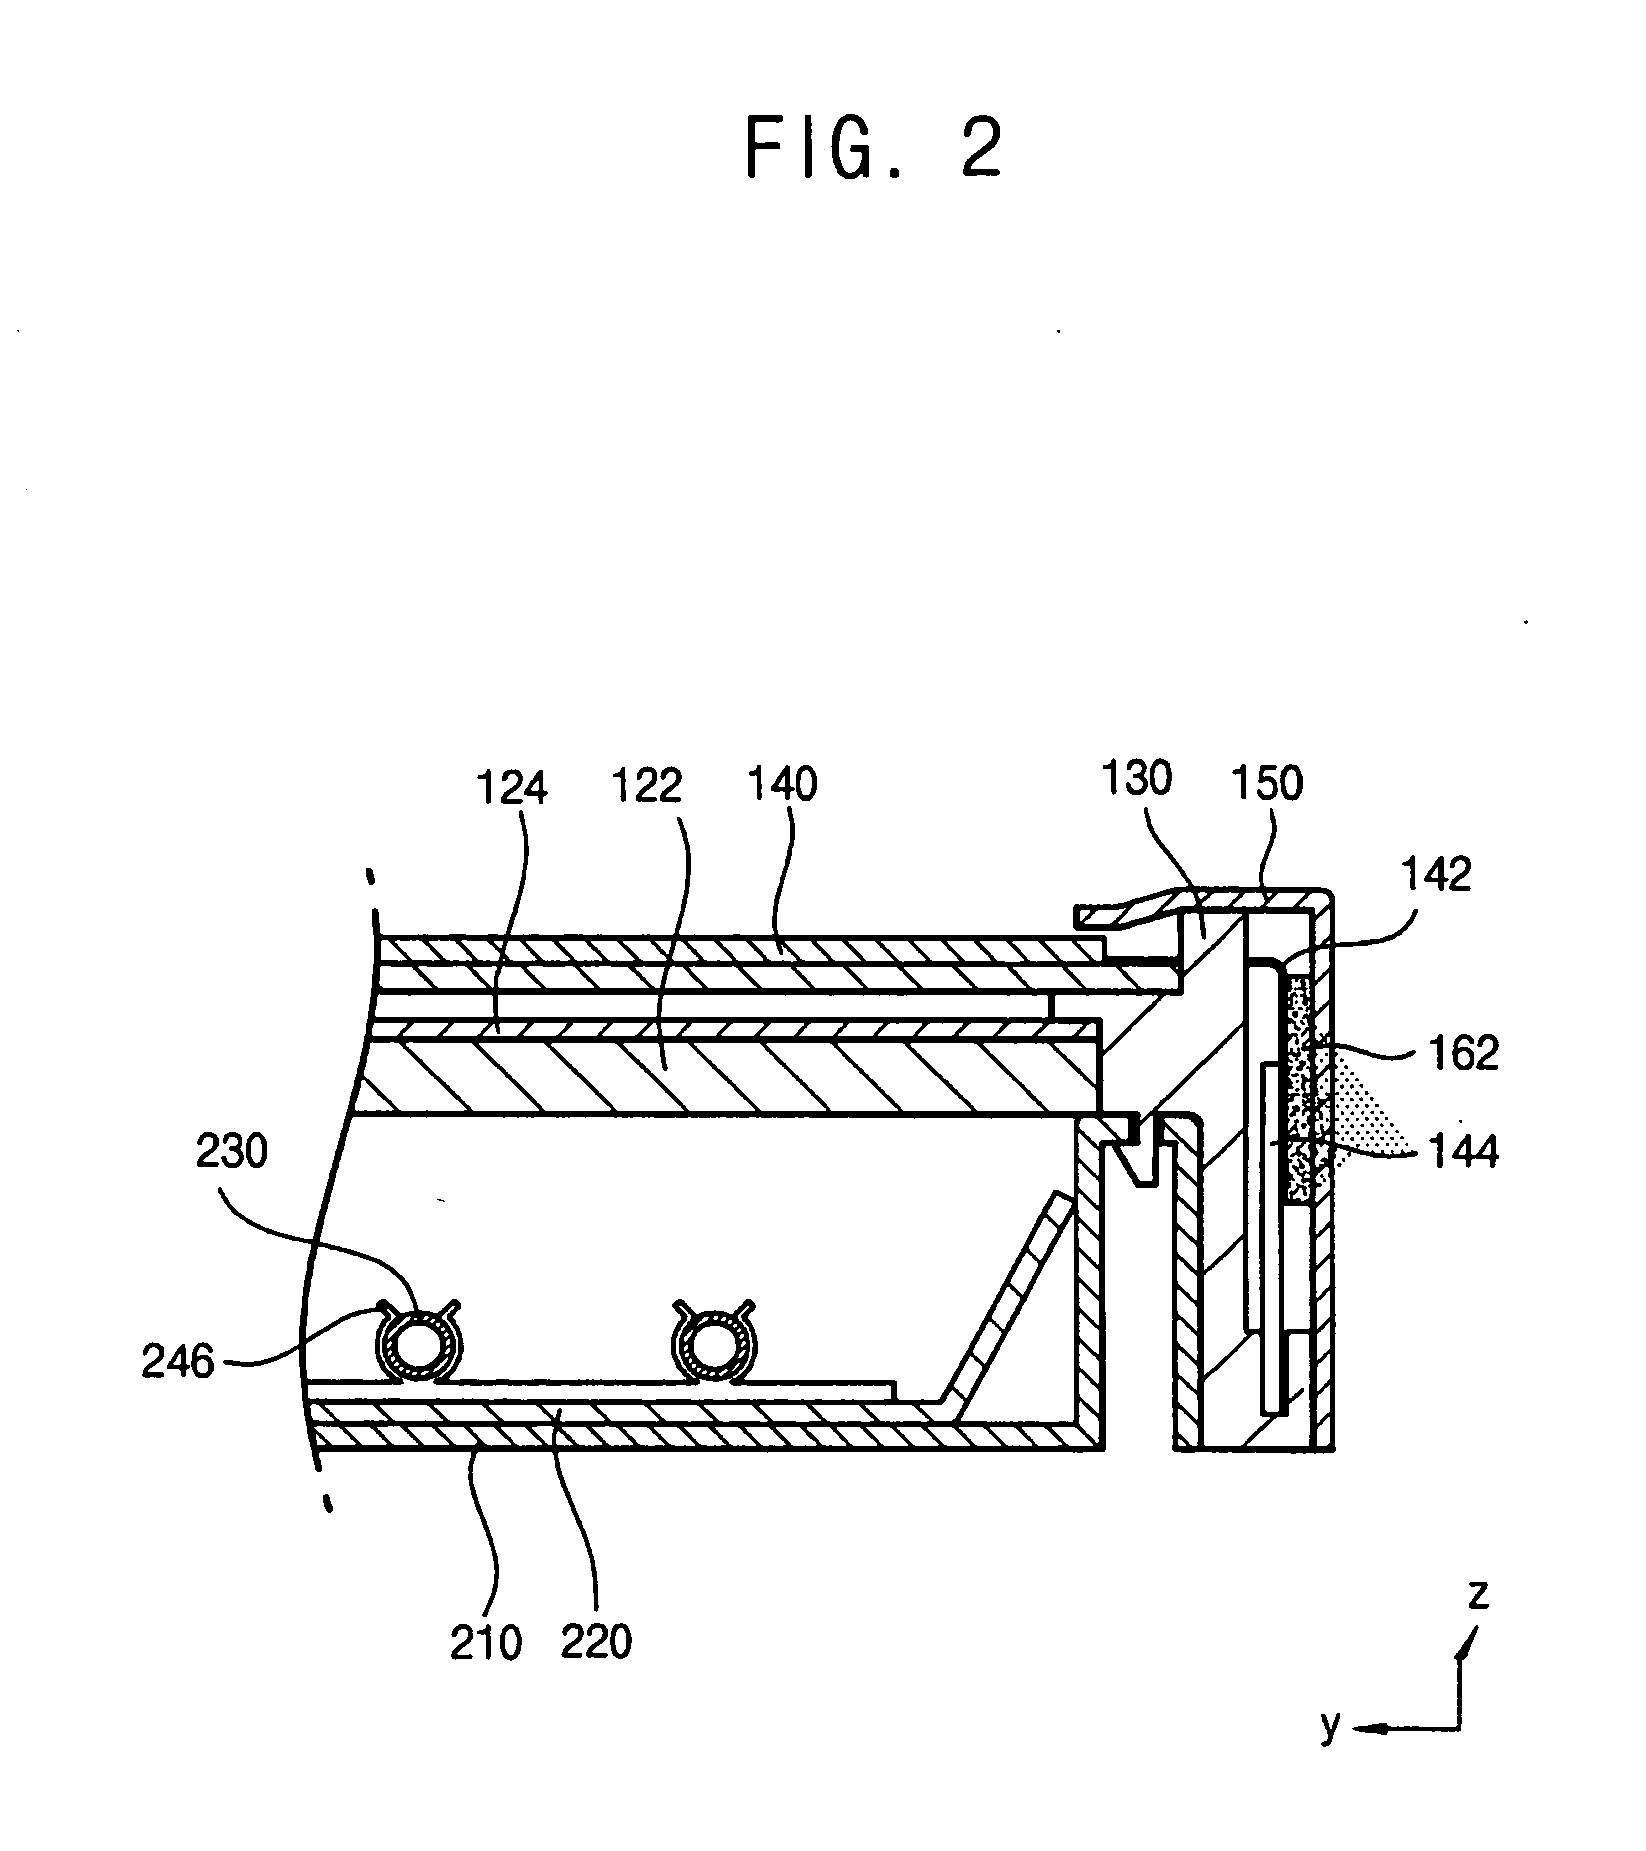 Flat panel display device including a conductive compressible body